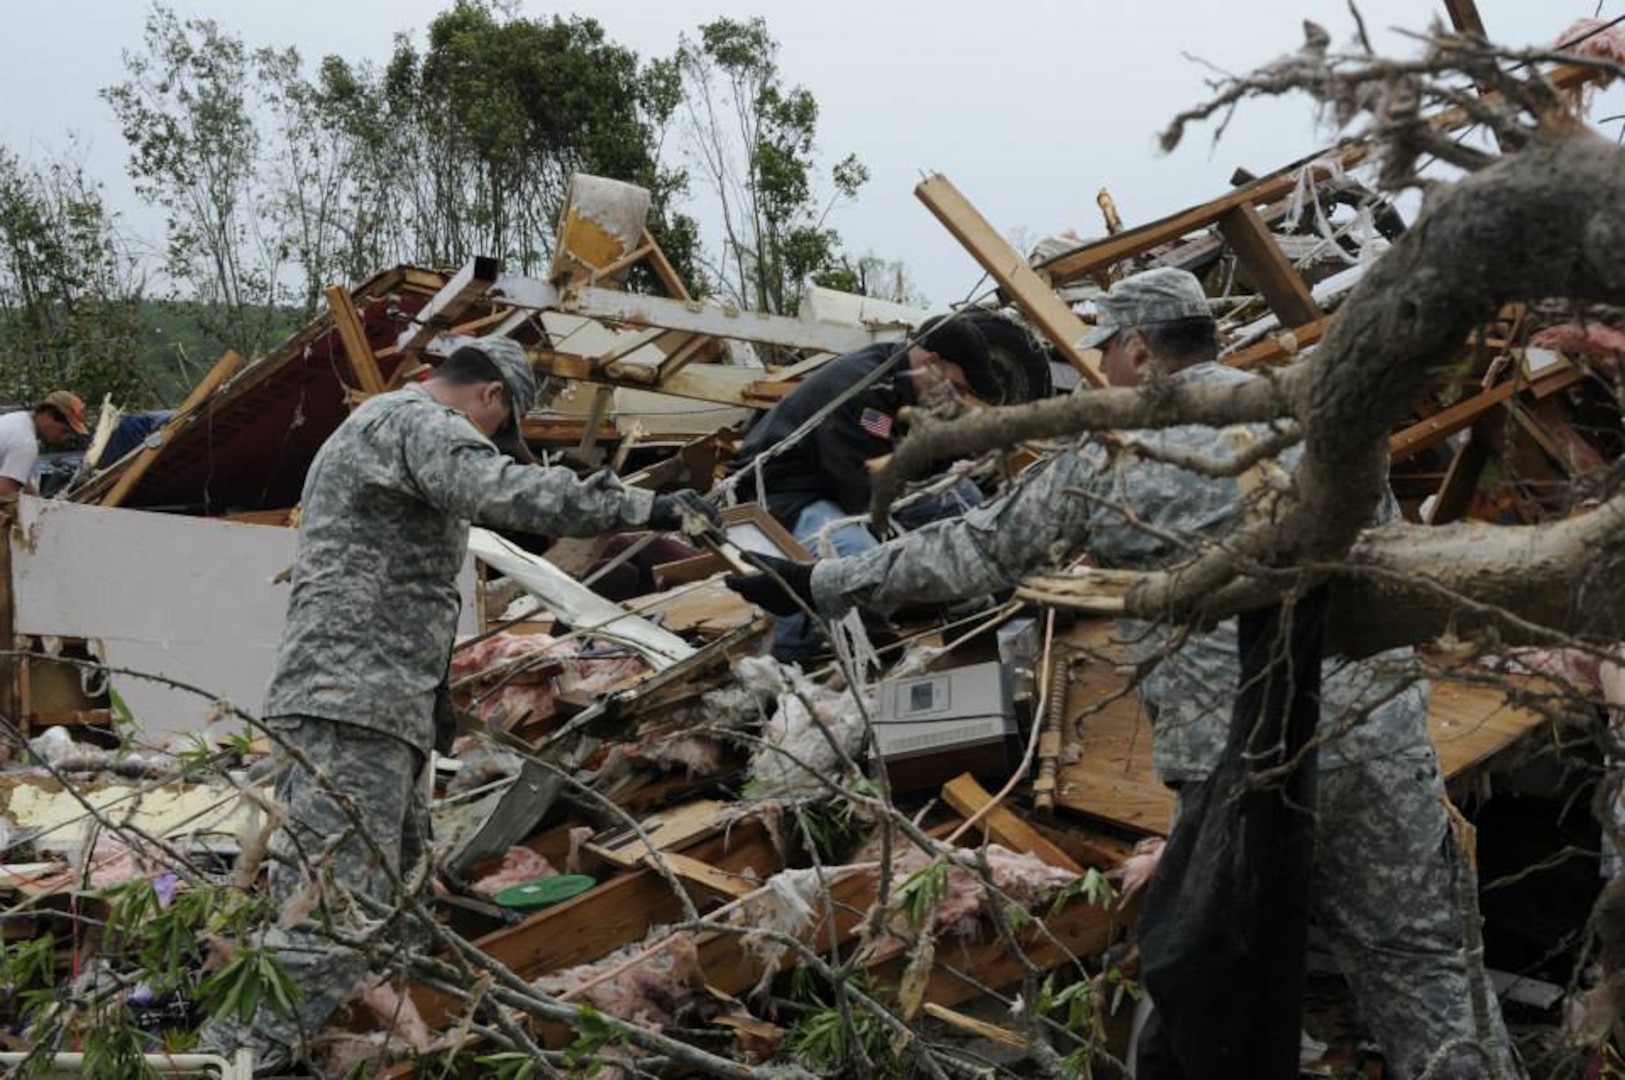 Arkansas National Guard members from the Conway based Special Troops Battalion, 39th Infantry Brigade Combat Team assist a family in Mayflower, Arkansas, salvage precious heirlooms amongst the debris April 28, 2014. Guardsmen were called to respond to their fellow neighbors in need after a tornado devastated communities in central Arkansas April 27, 2014. 